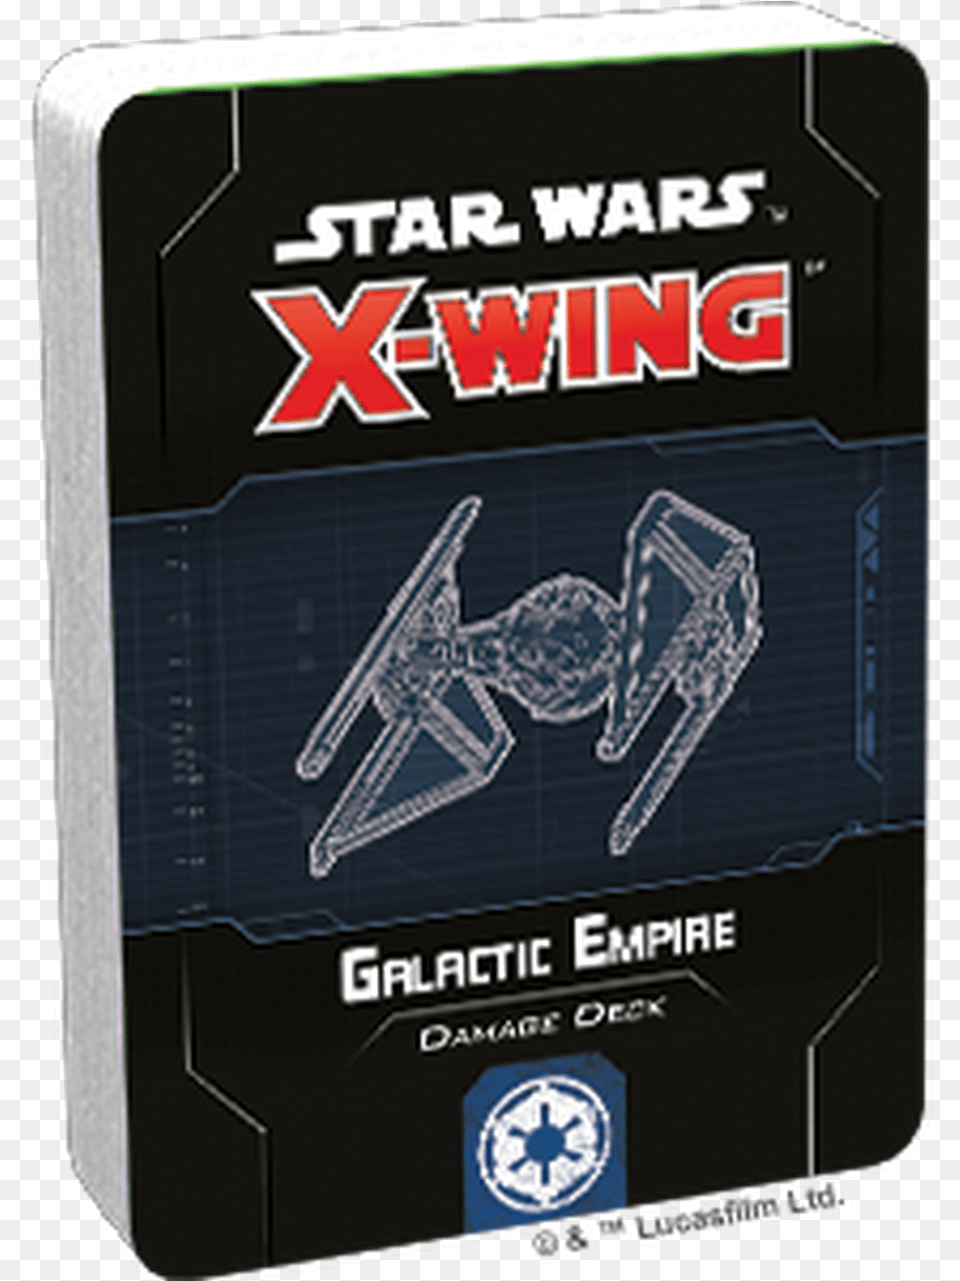 X Wing 2e Galactic Empire Damage Deck Star Wars X Wing Galactic Republic Damage Deck, Machine, Spoke Free Png Download